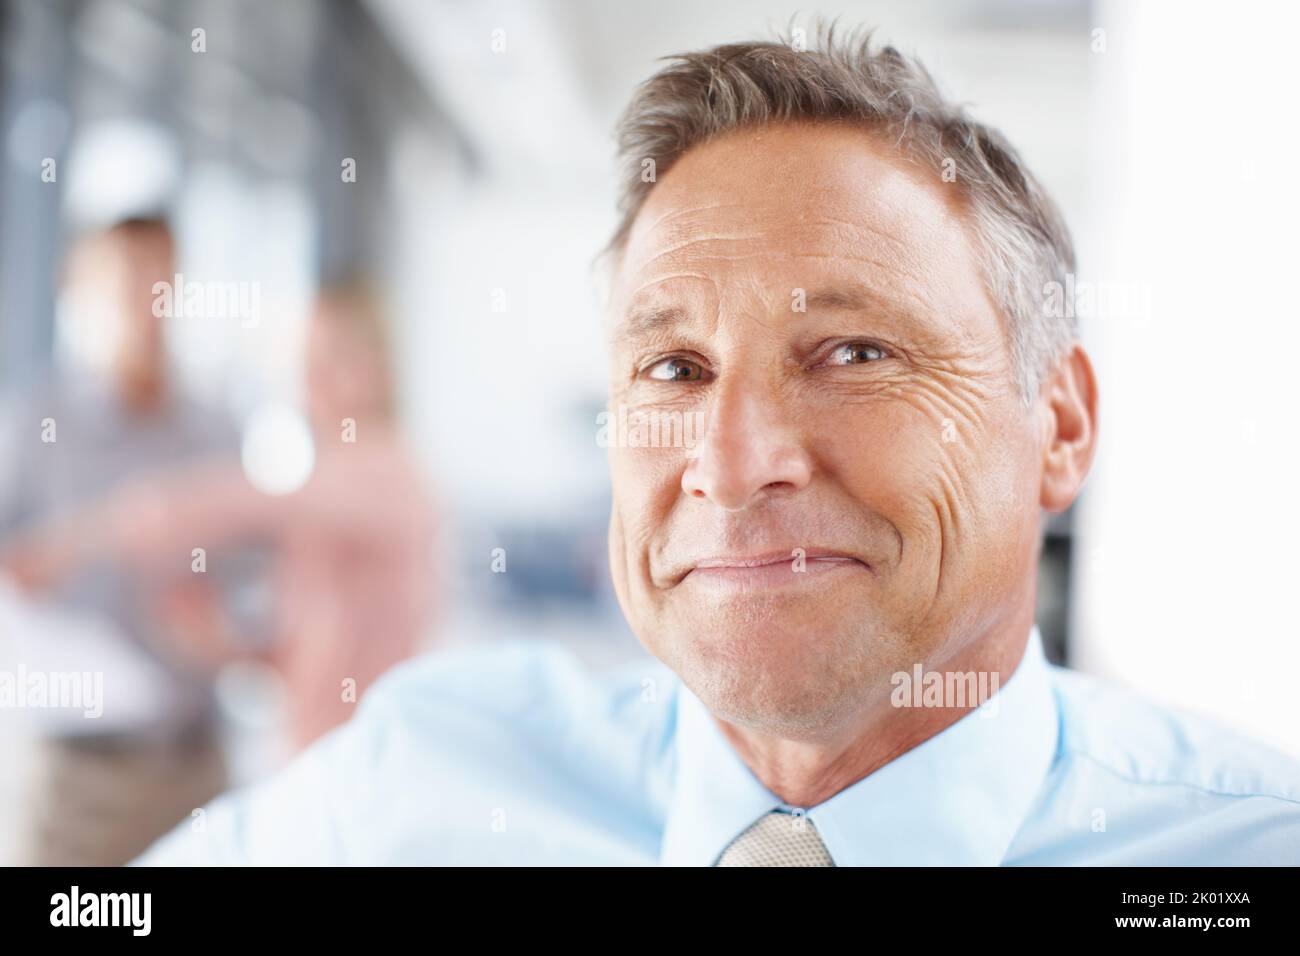 His leadership skills are unquestionable. Portrait of a senior business manager smiling confidently - Copyspace. Stock Photo